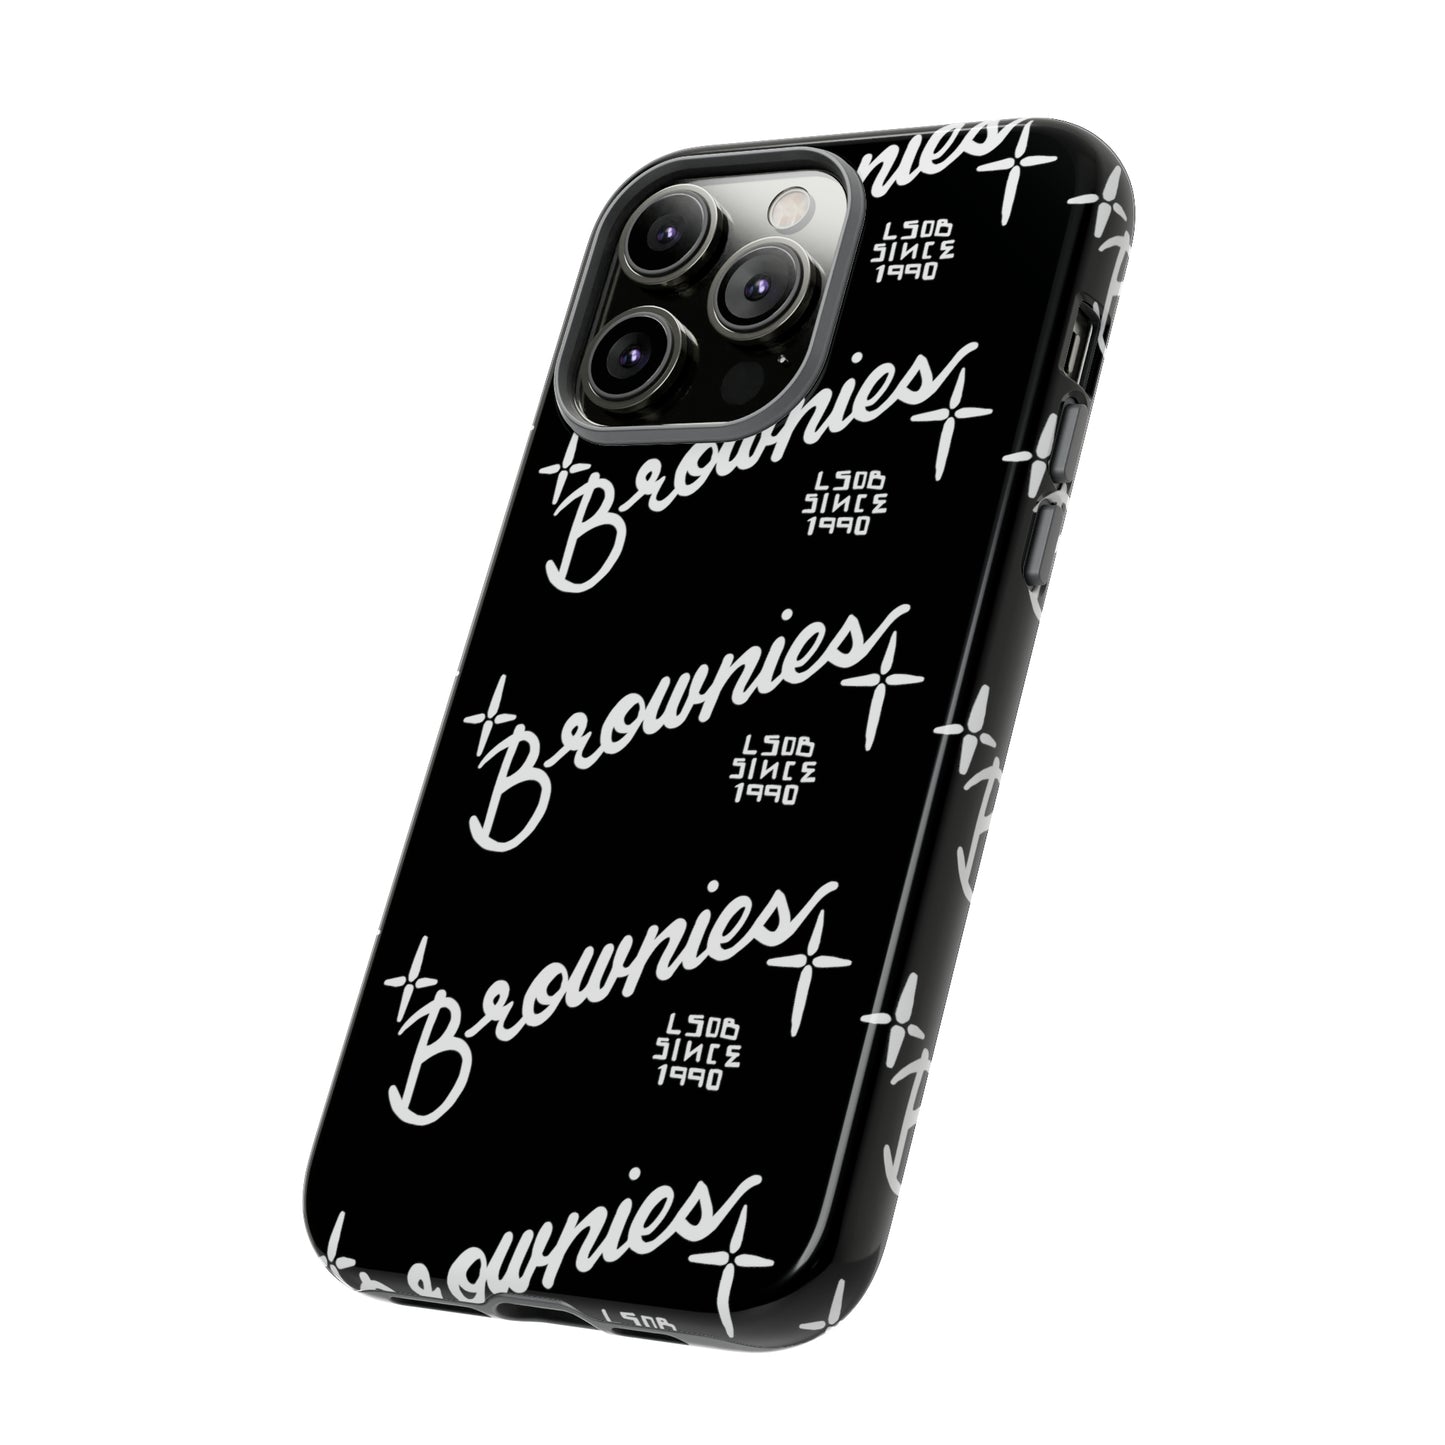 Brownies Cell Phone Case blk pattern